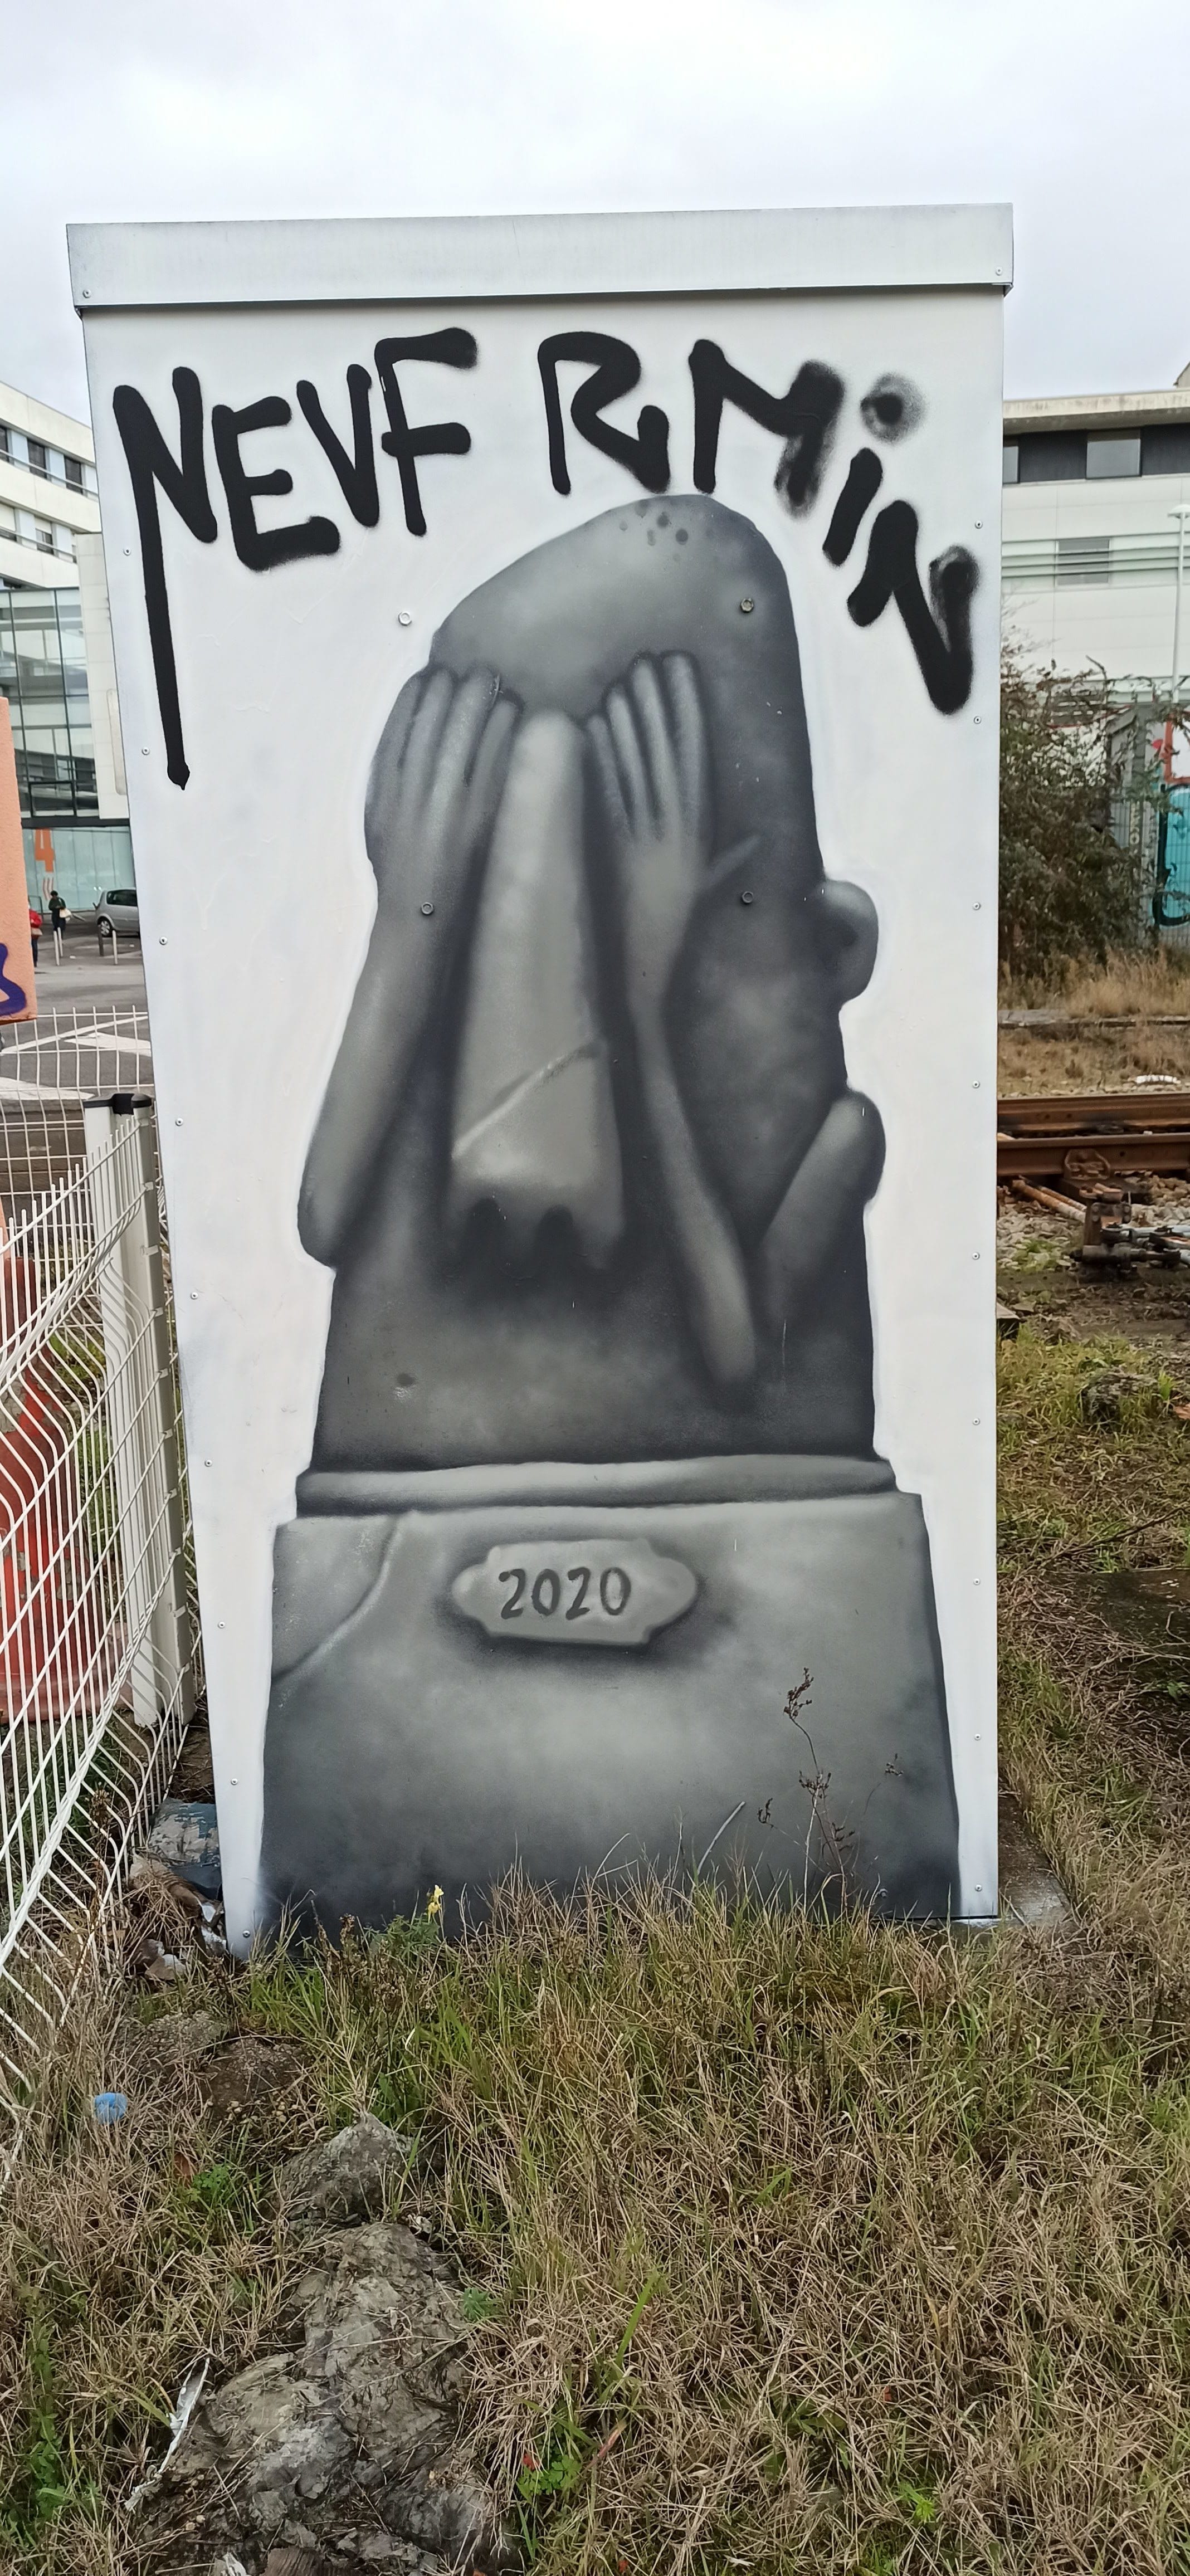 Graffiti 4698  by the artist Ador captured by Rabot in Rezé France